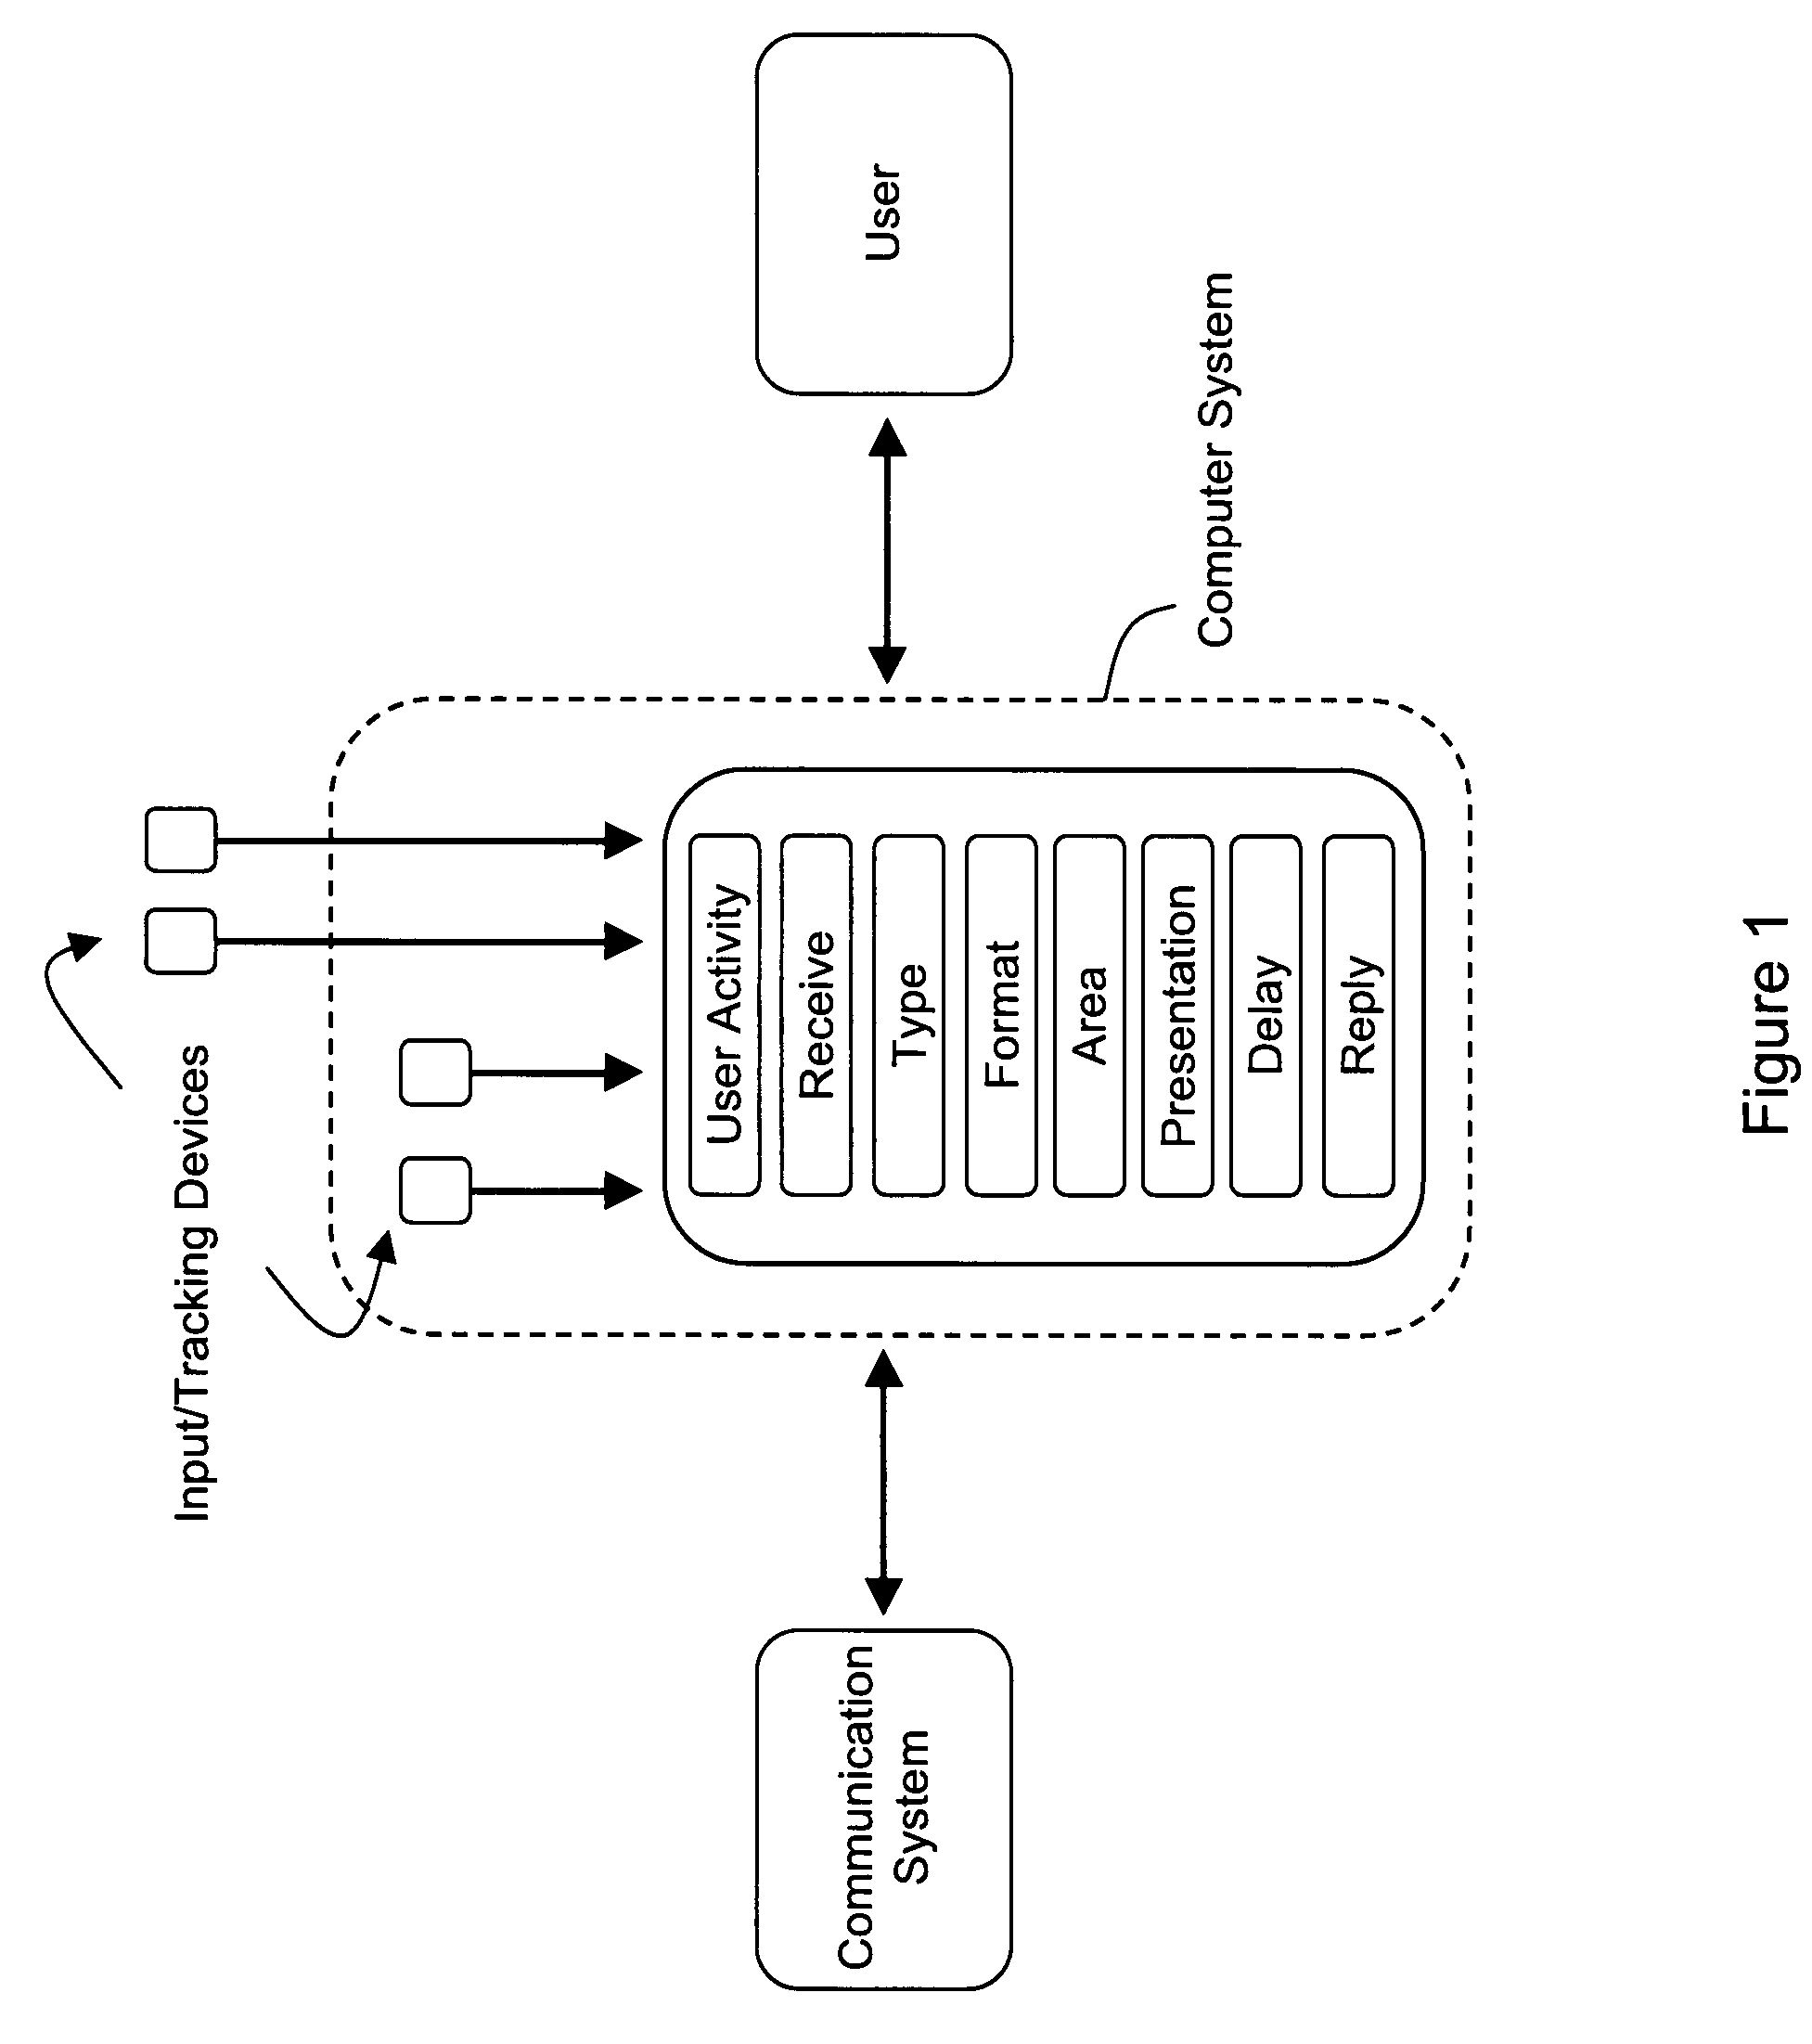 Automatic communication notification and answering method in communication correspondance